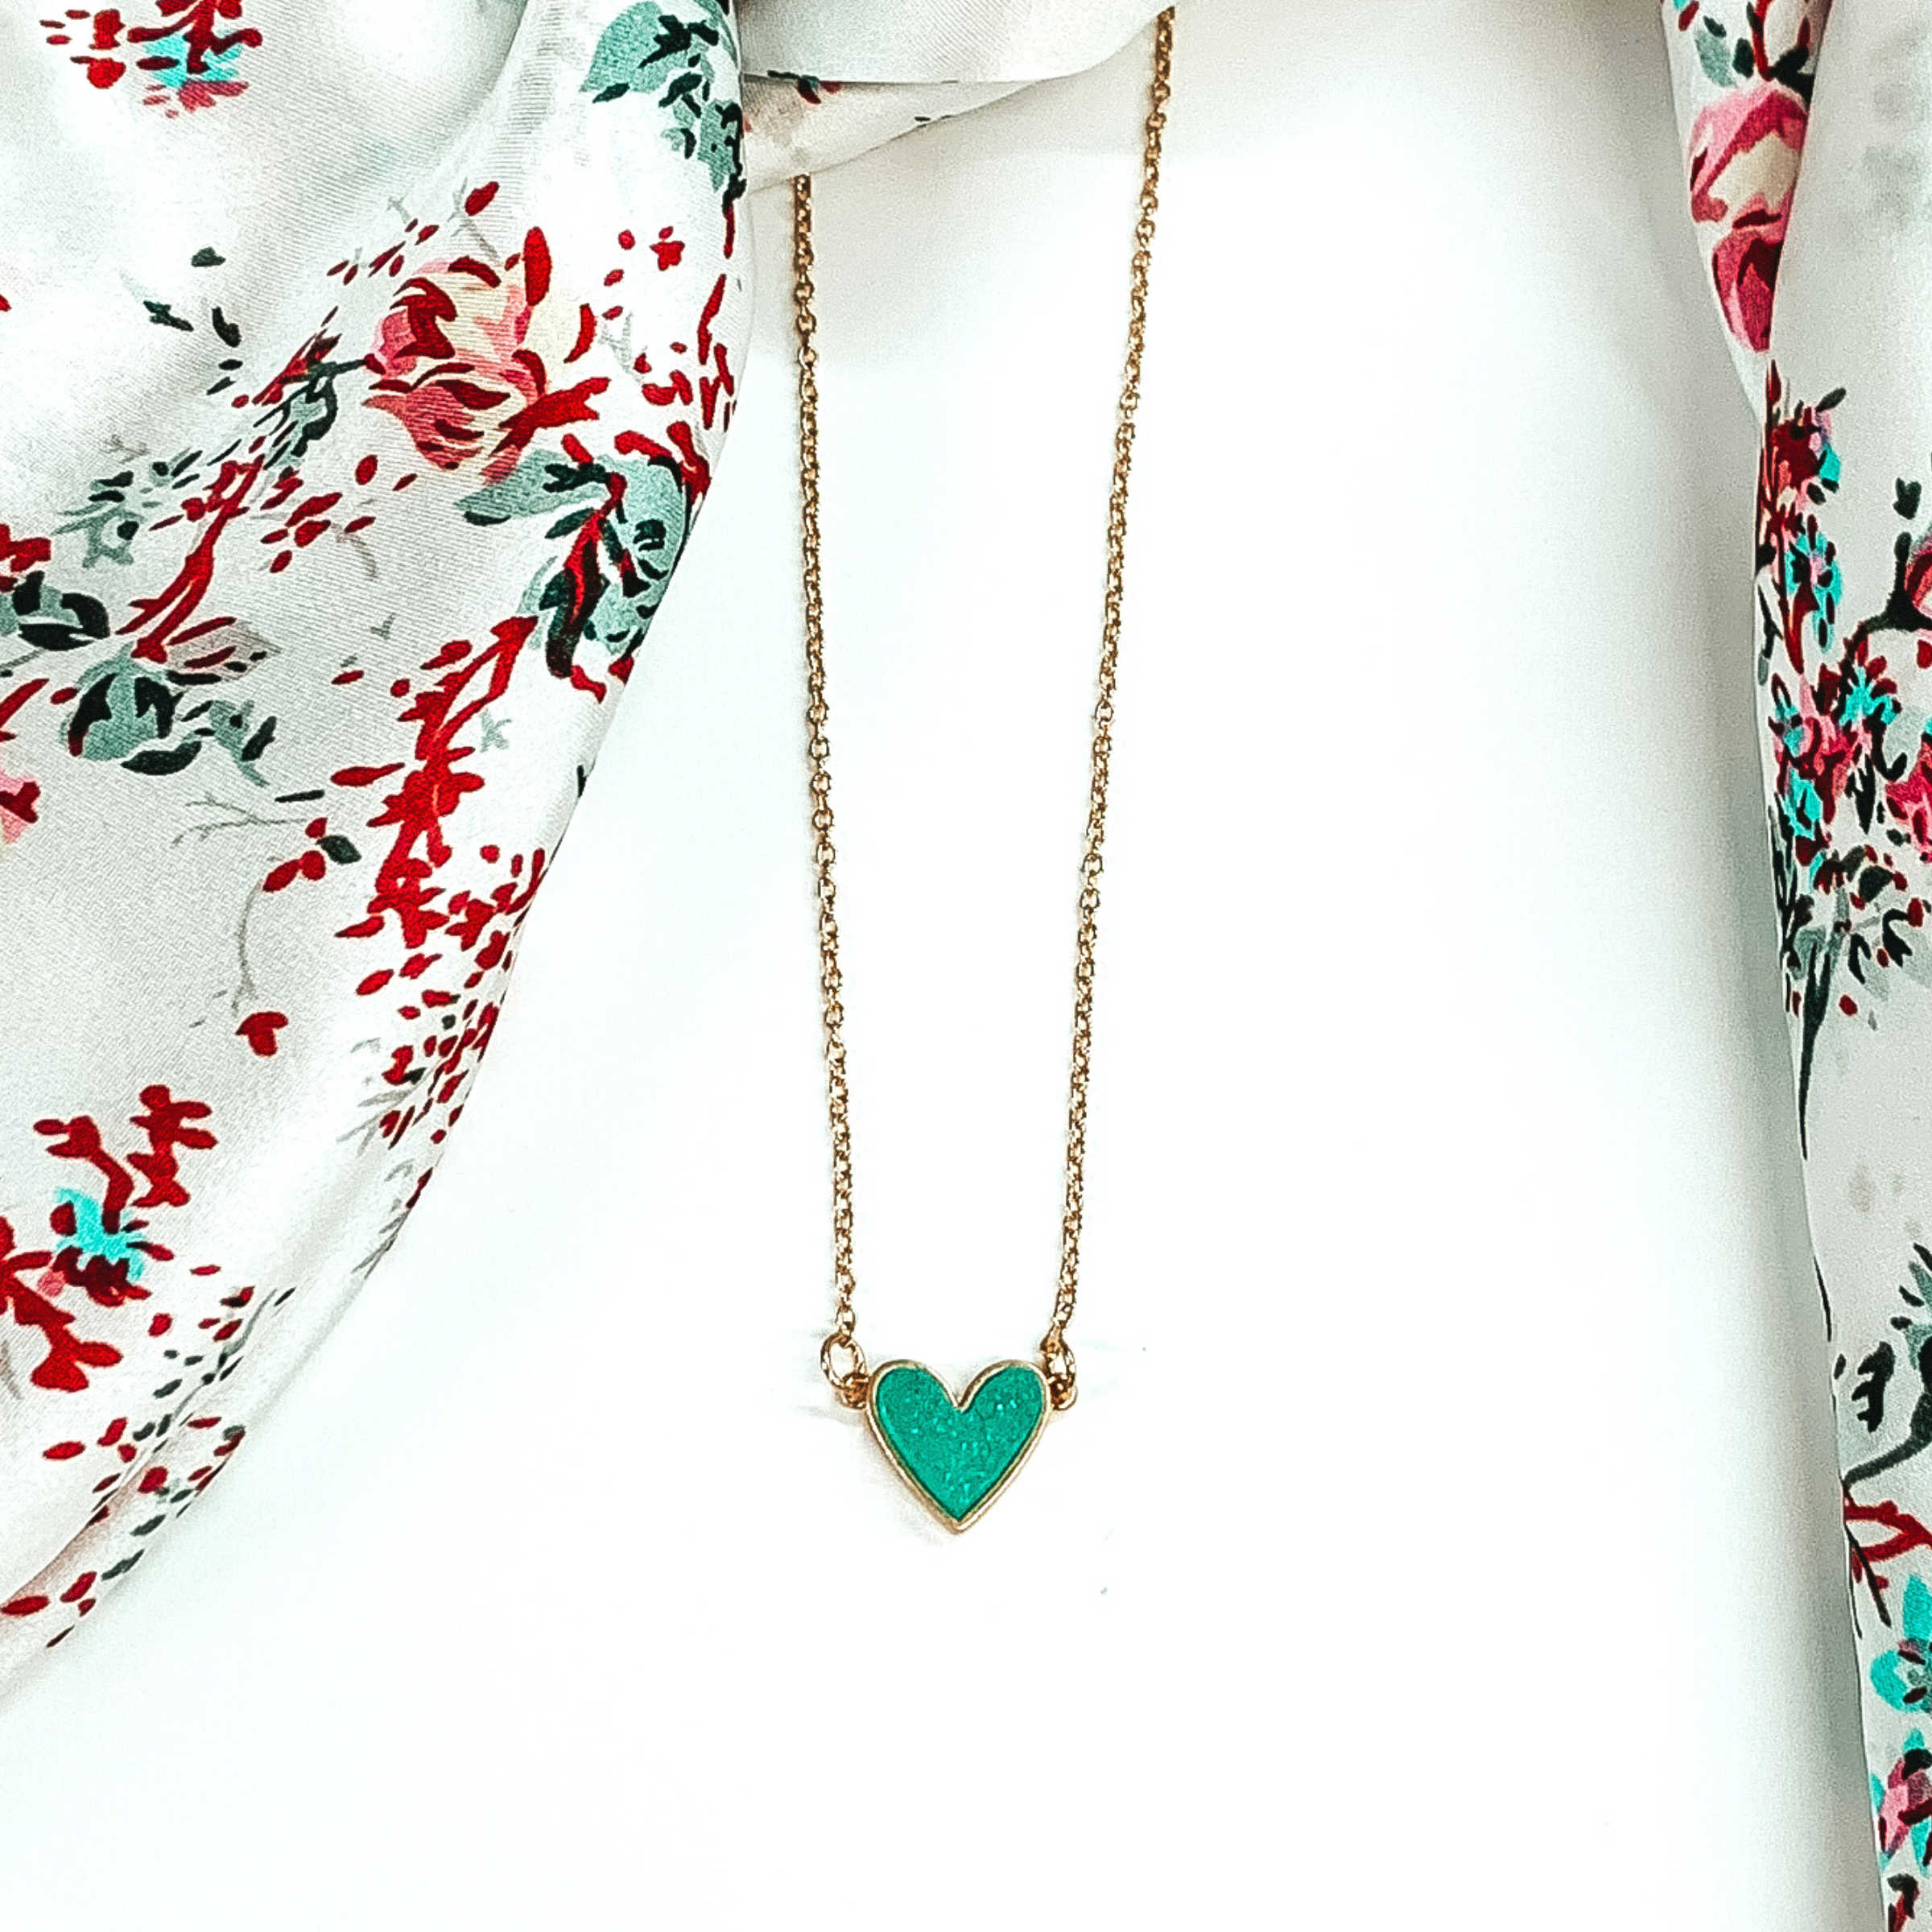 Small, gold chained necklace with a mint colored druzy heart pendant. This necklace is pictured on a white background with a white rag with colored flowers laying above the necklace. 